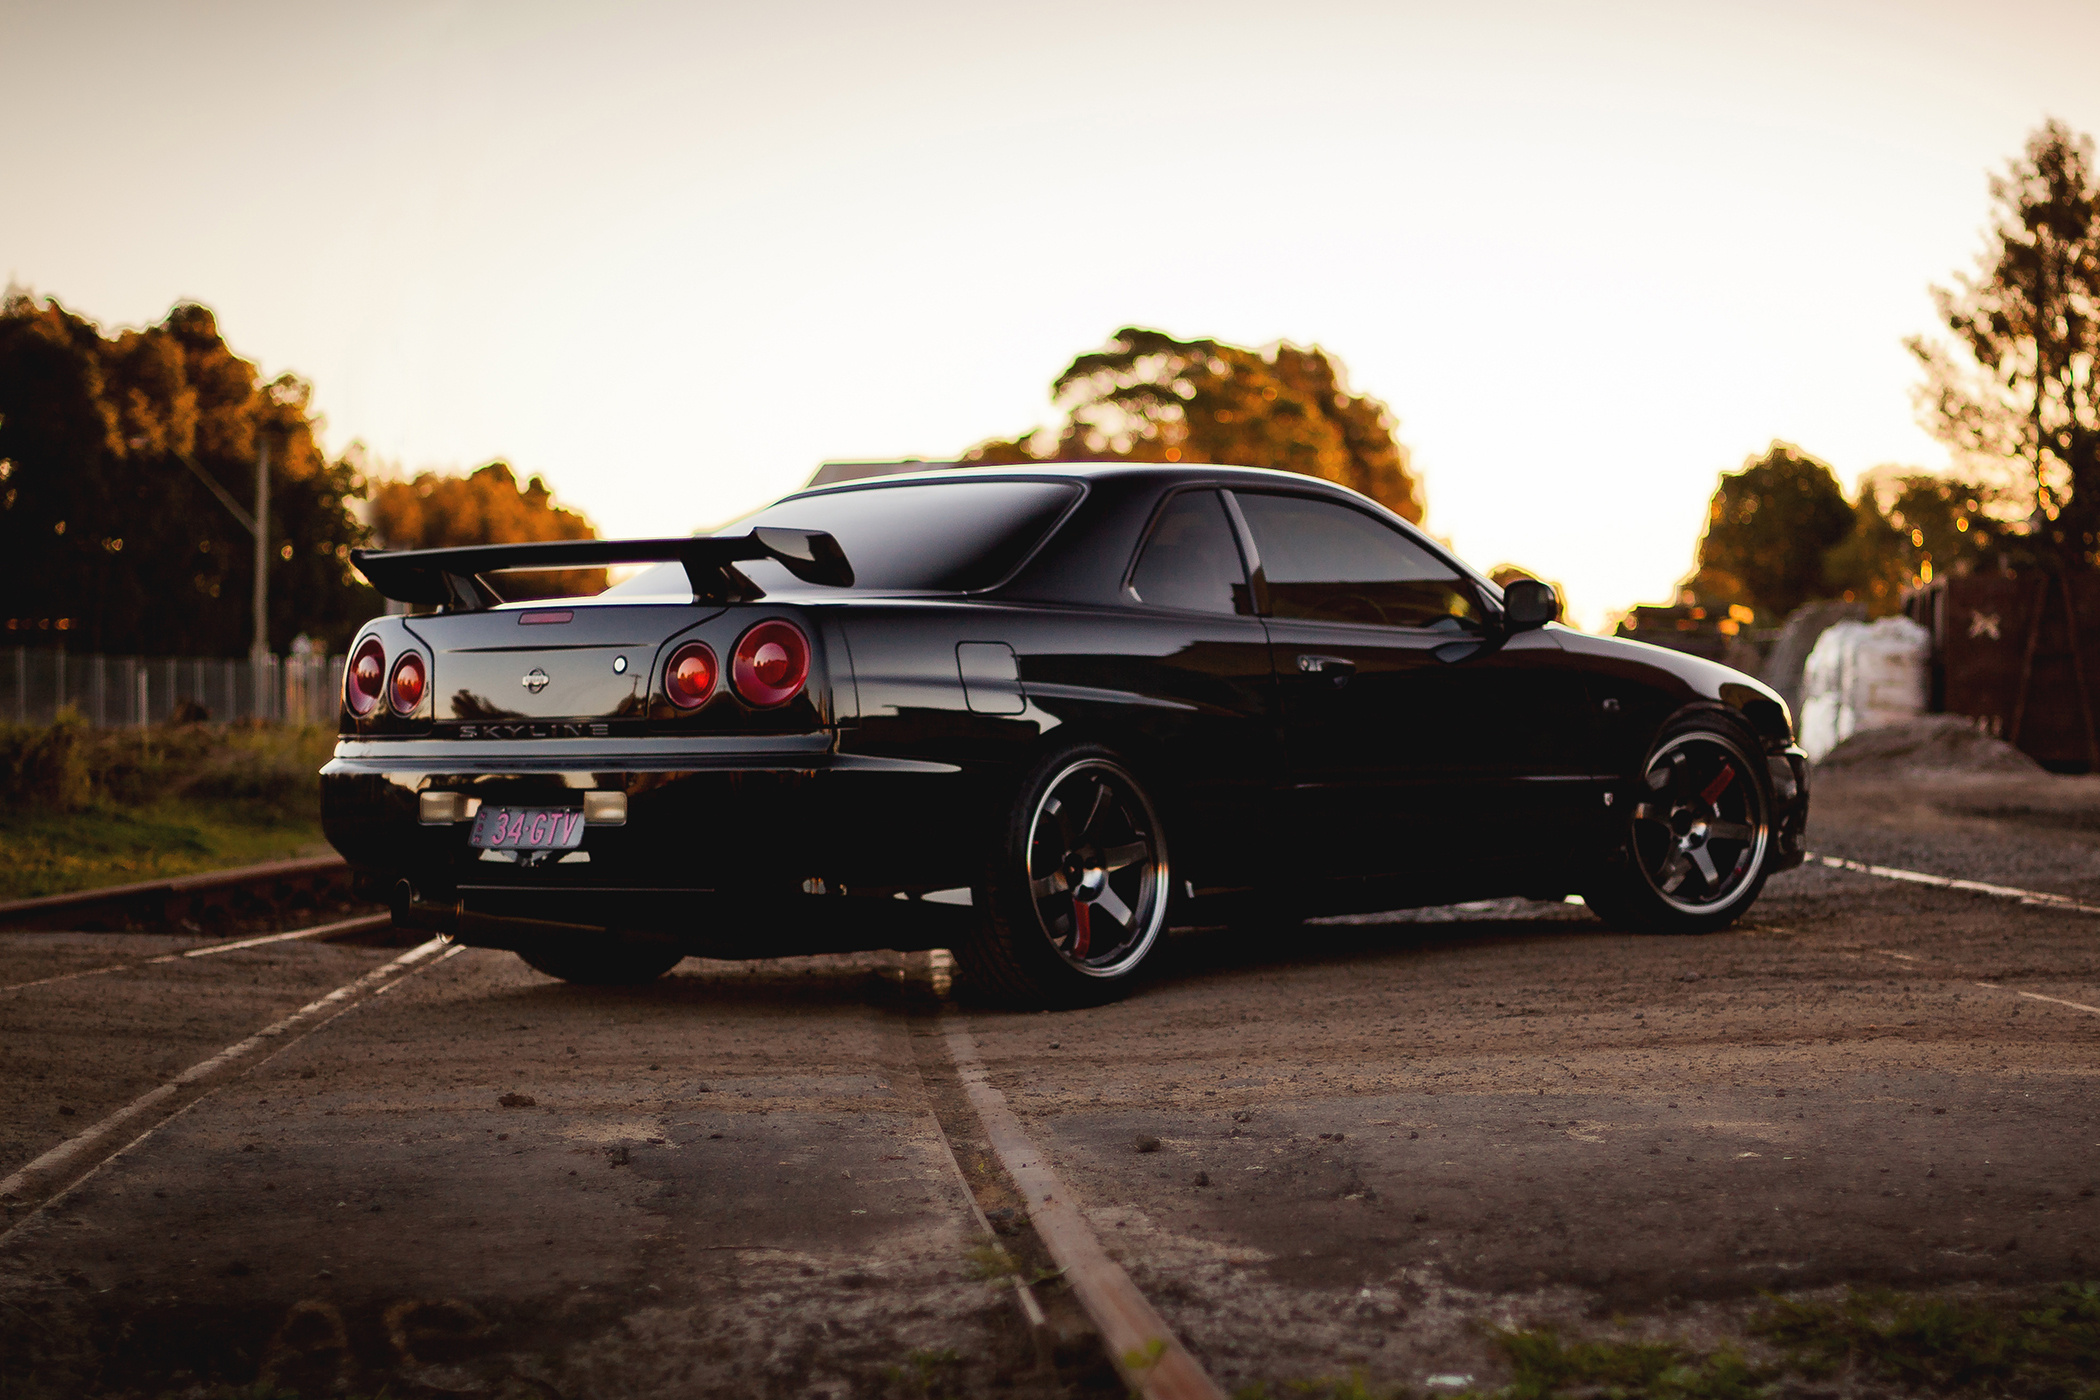 Popular Gtr images for mobile phone